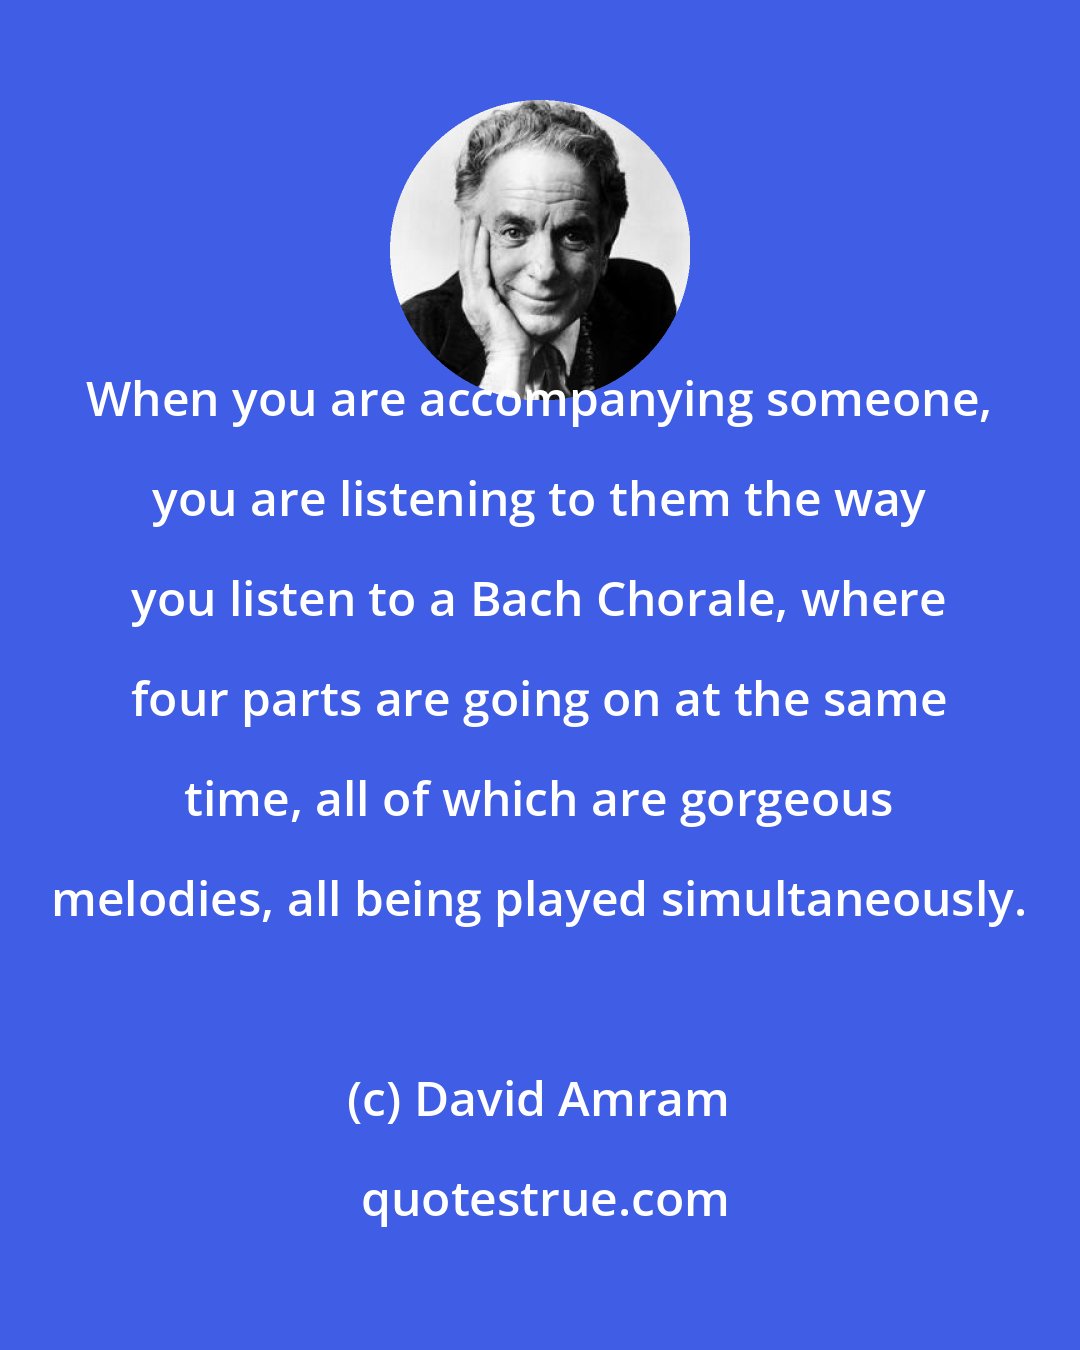 David Amram: When you are accompanying someone, you are listening to them the way you listen to a Bach Chorale, where four parts are going on at the same time, all of which are gorgeous melodies, all being played simultaneously.